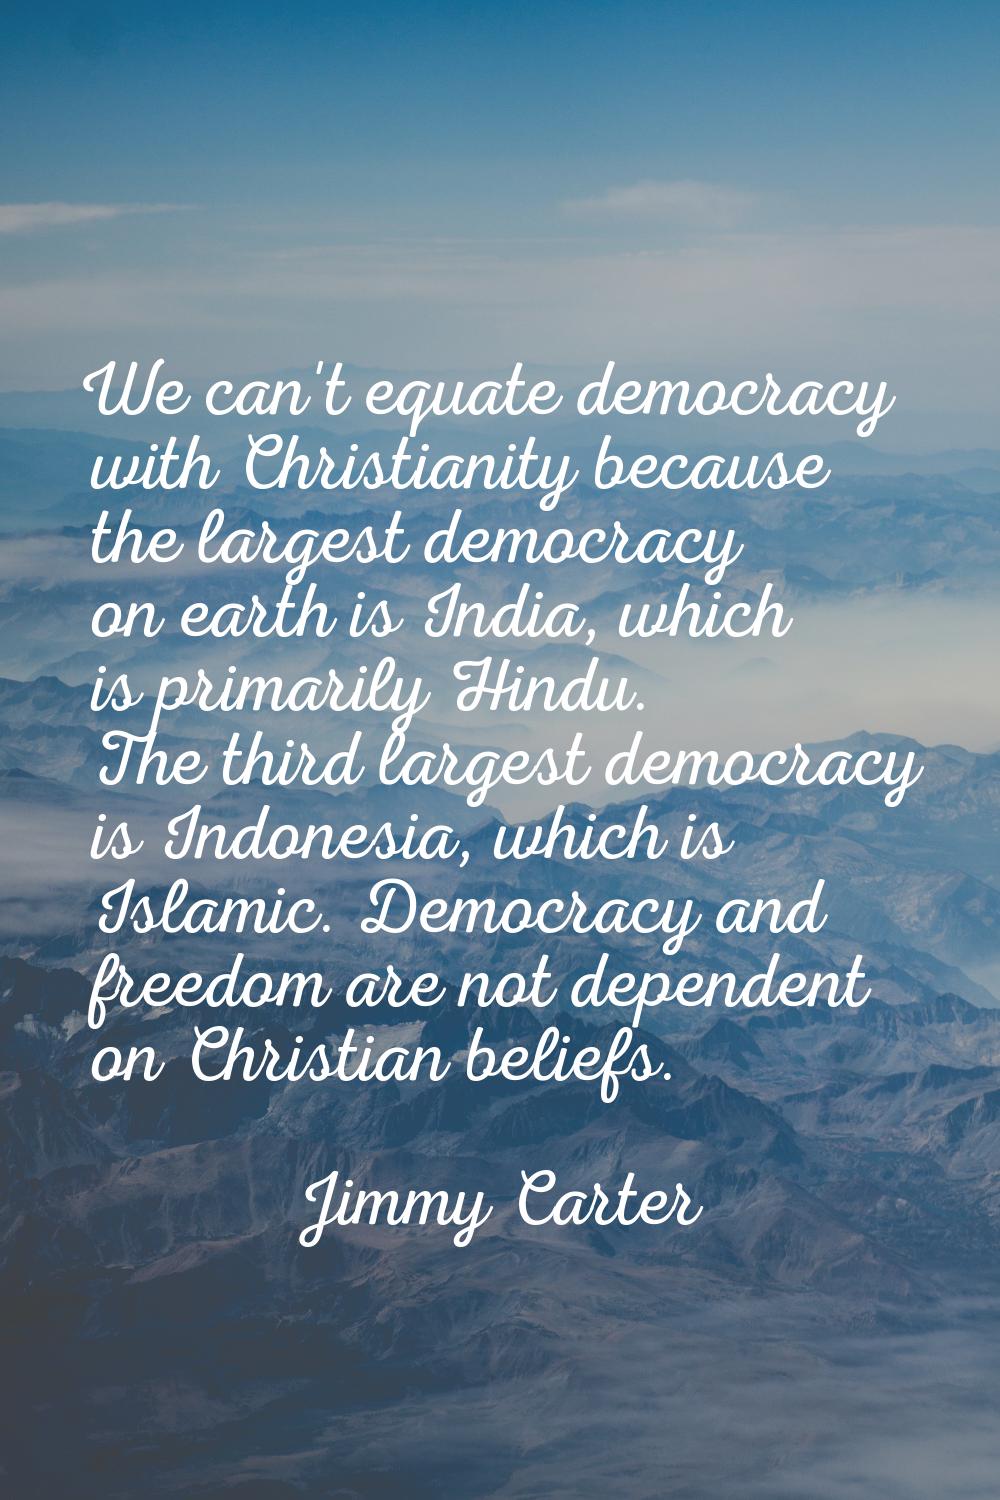 We can't equate democracy with Christianity because the largest democracy on earth is India, which 